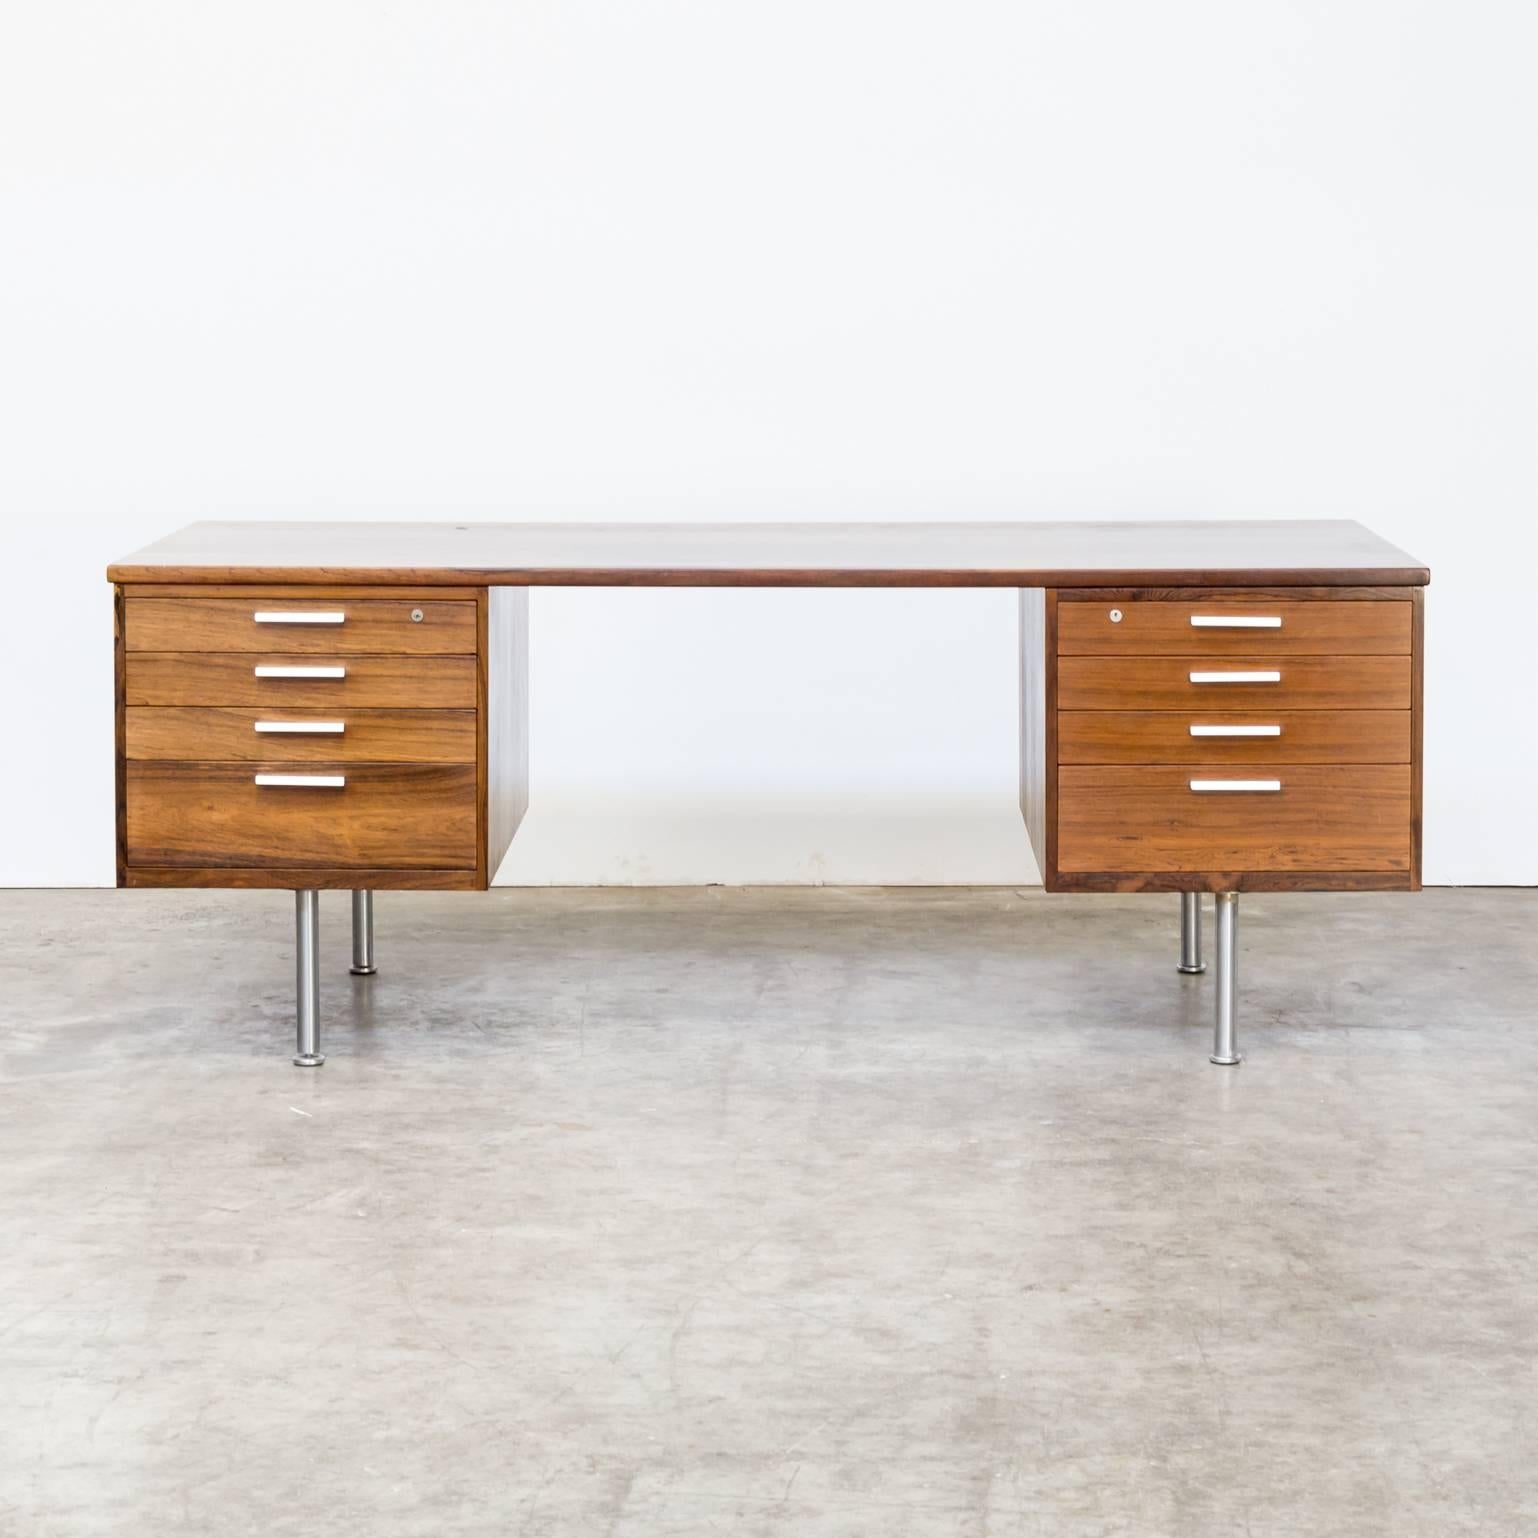 1960s Kai Kristiansen rosewood writing desk for Feldballes Møbelfabrik. Good condition consistent with age and use.